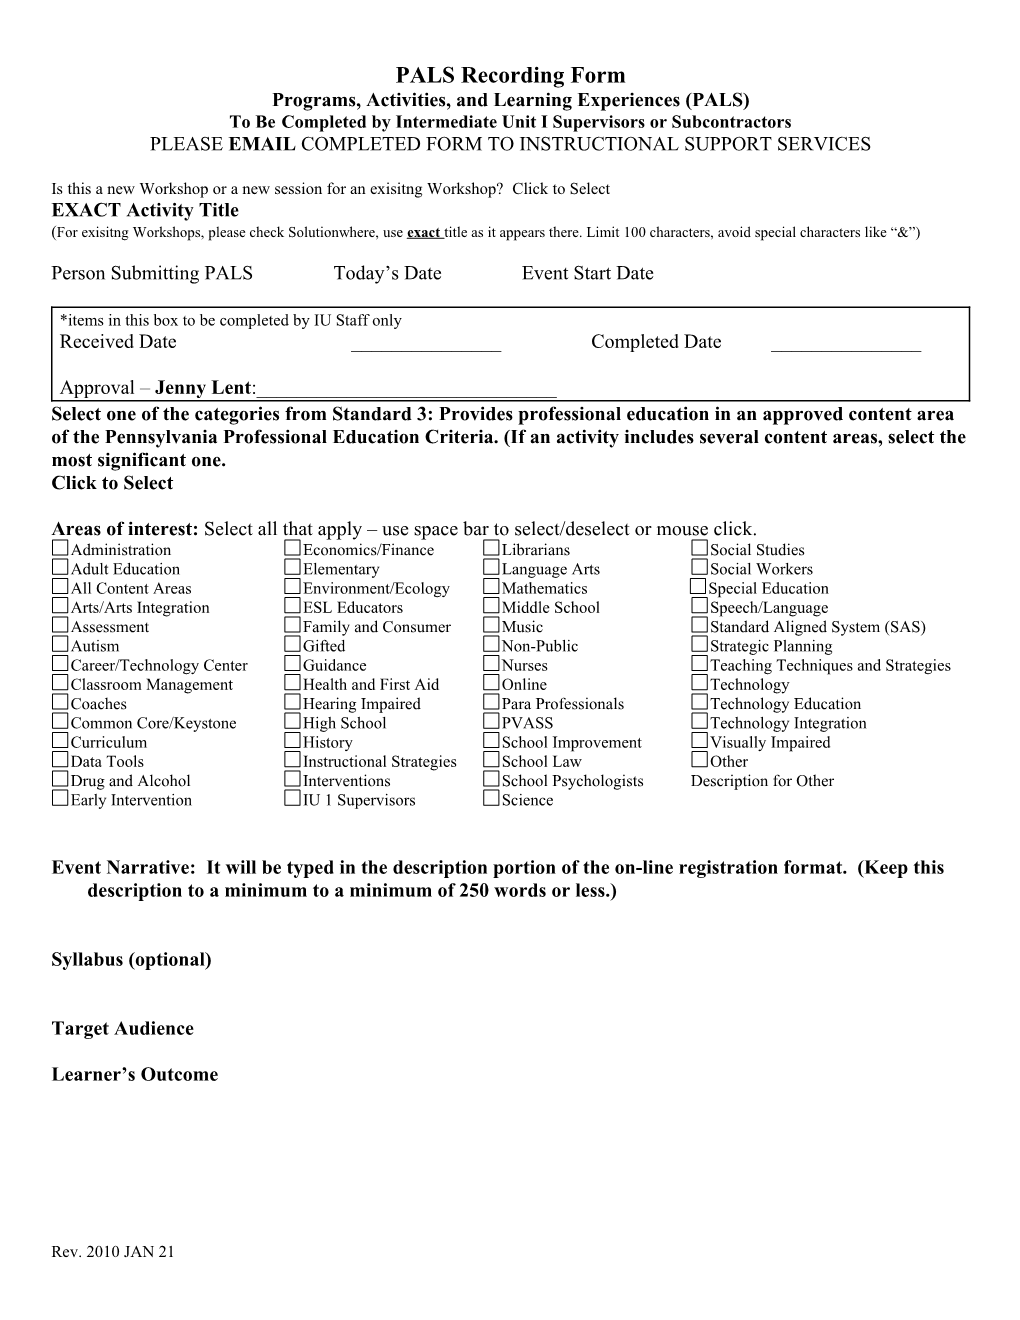 Programs, Activities, and Learning Experiences (PALS) Recording Form